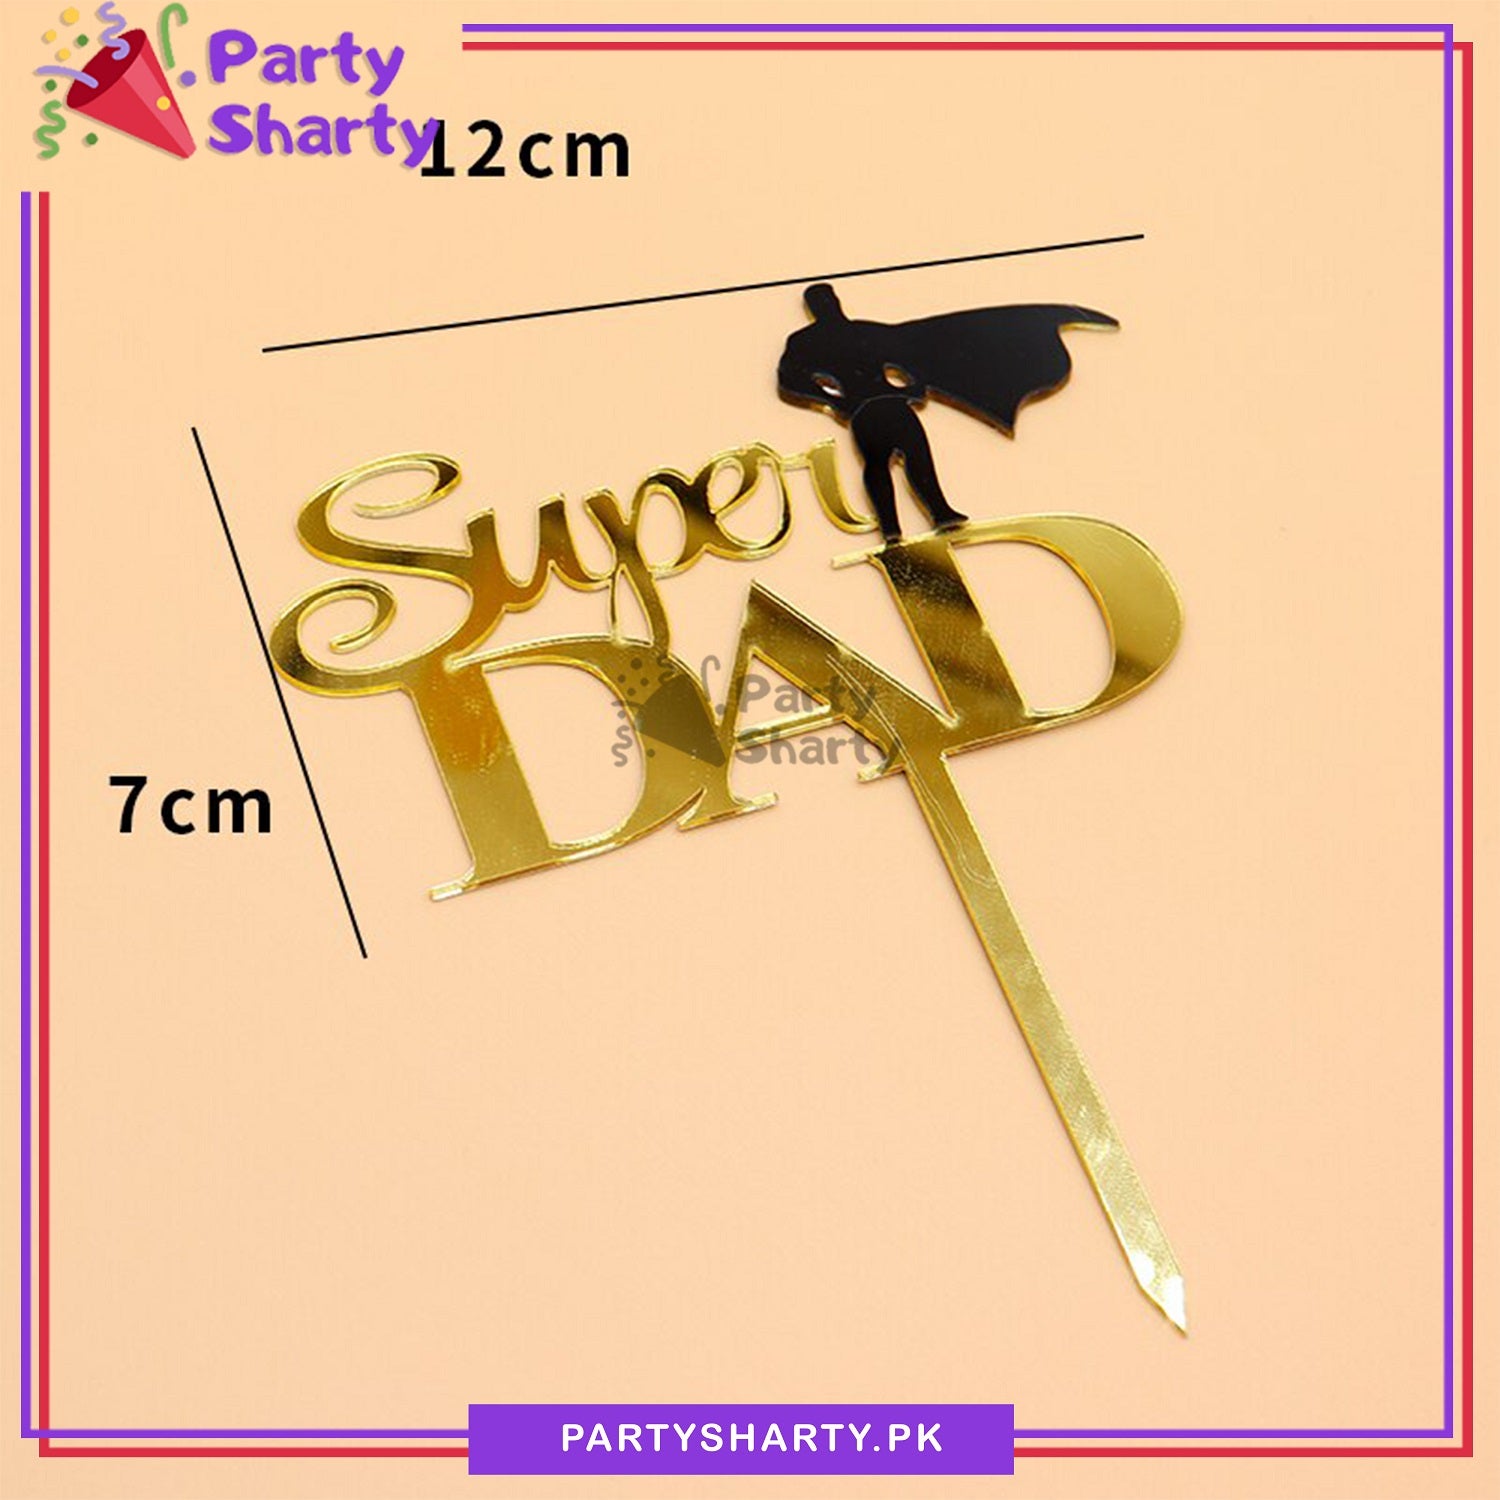 Golden Super Dad Acrylic Cake Topper For Fathers Day or Birthday Party Celebration and Decoration